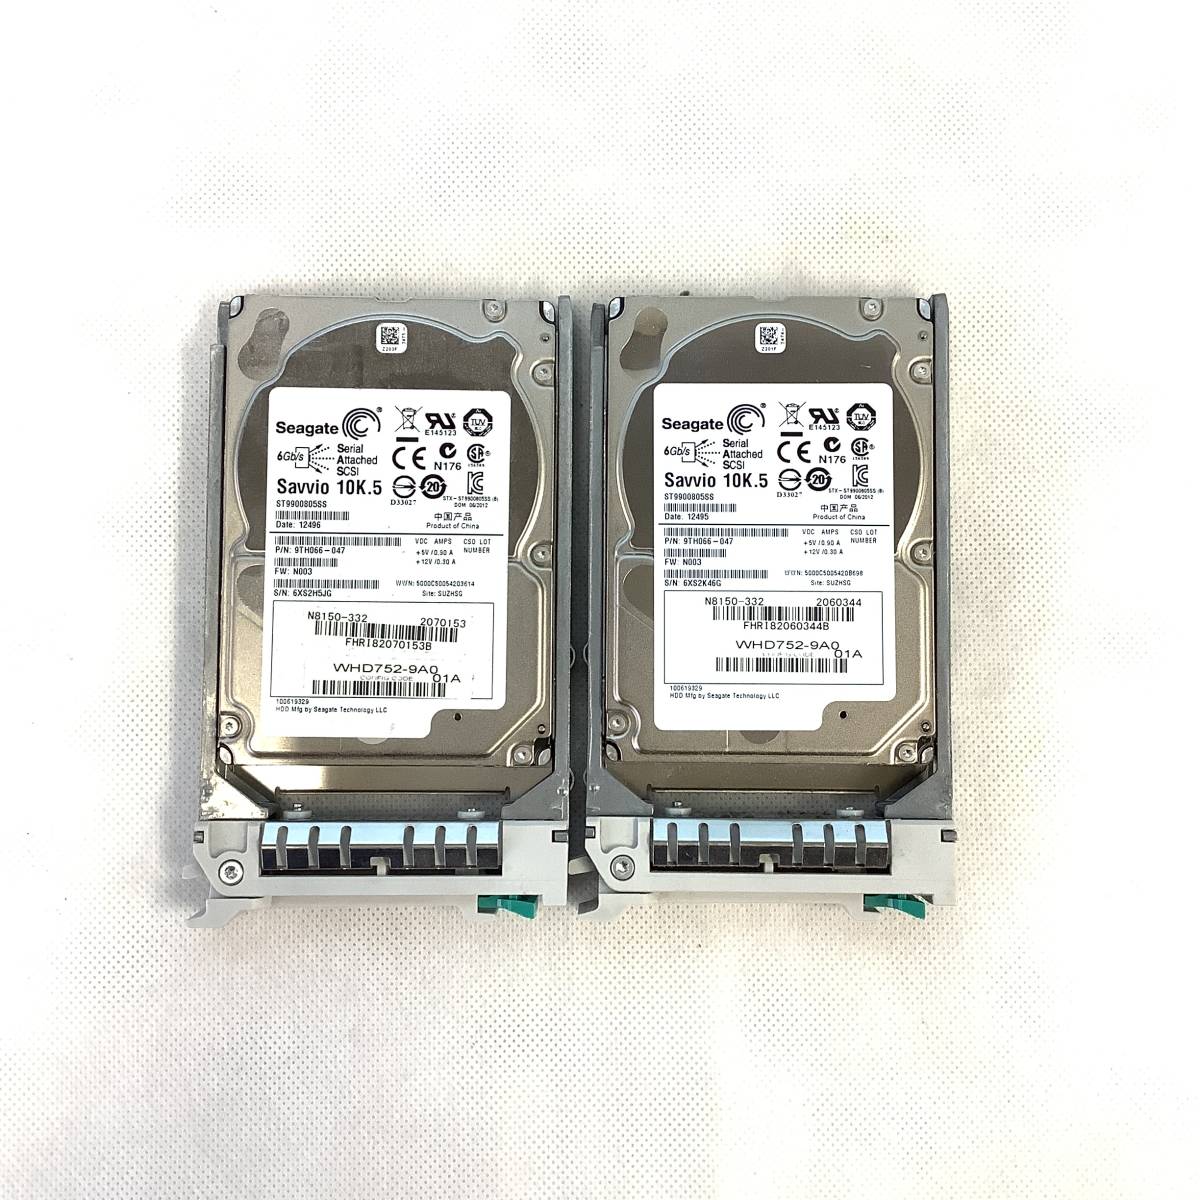 K6013067 Seagate 900GB SAS 10K.5 2.5 -inch HDD 2 point [ used operation goods ]